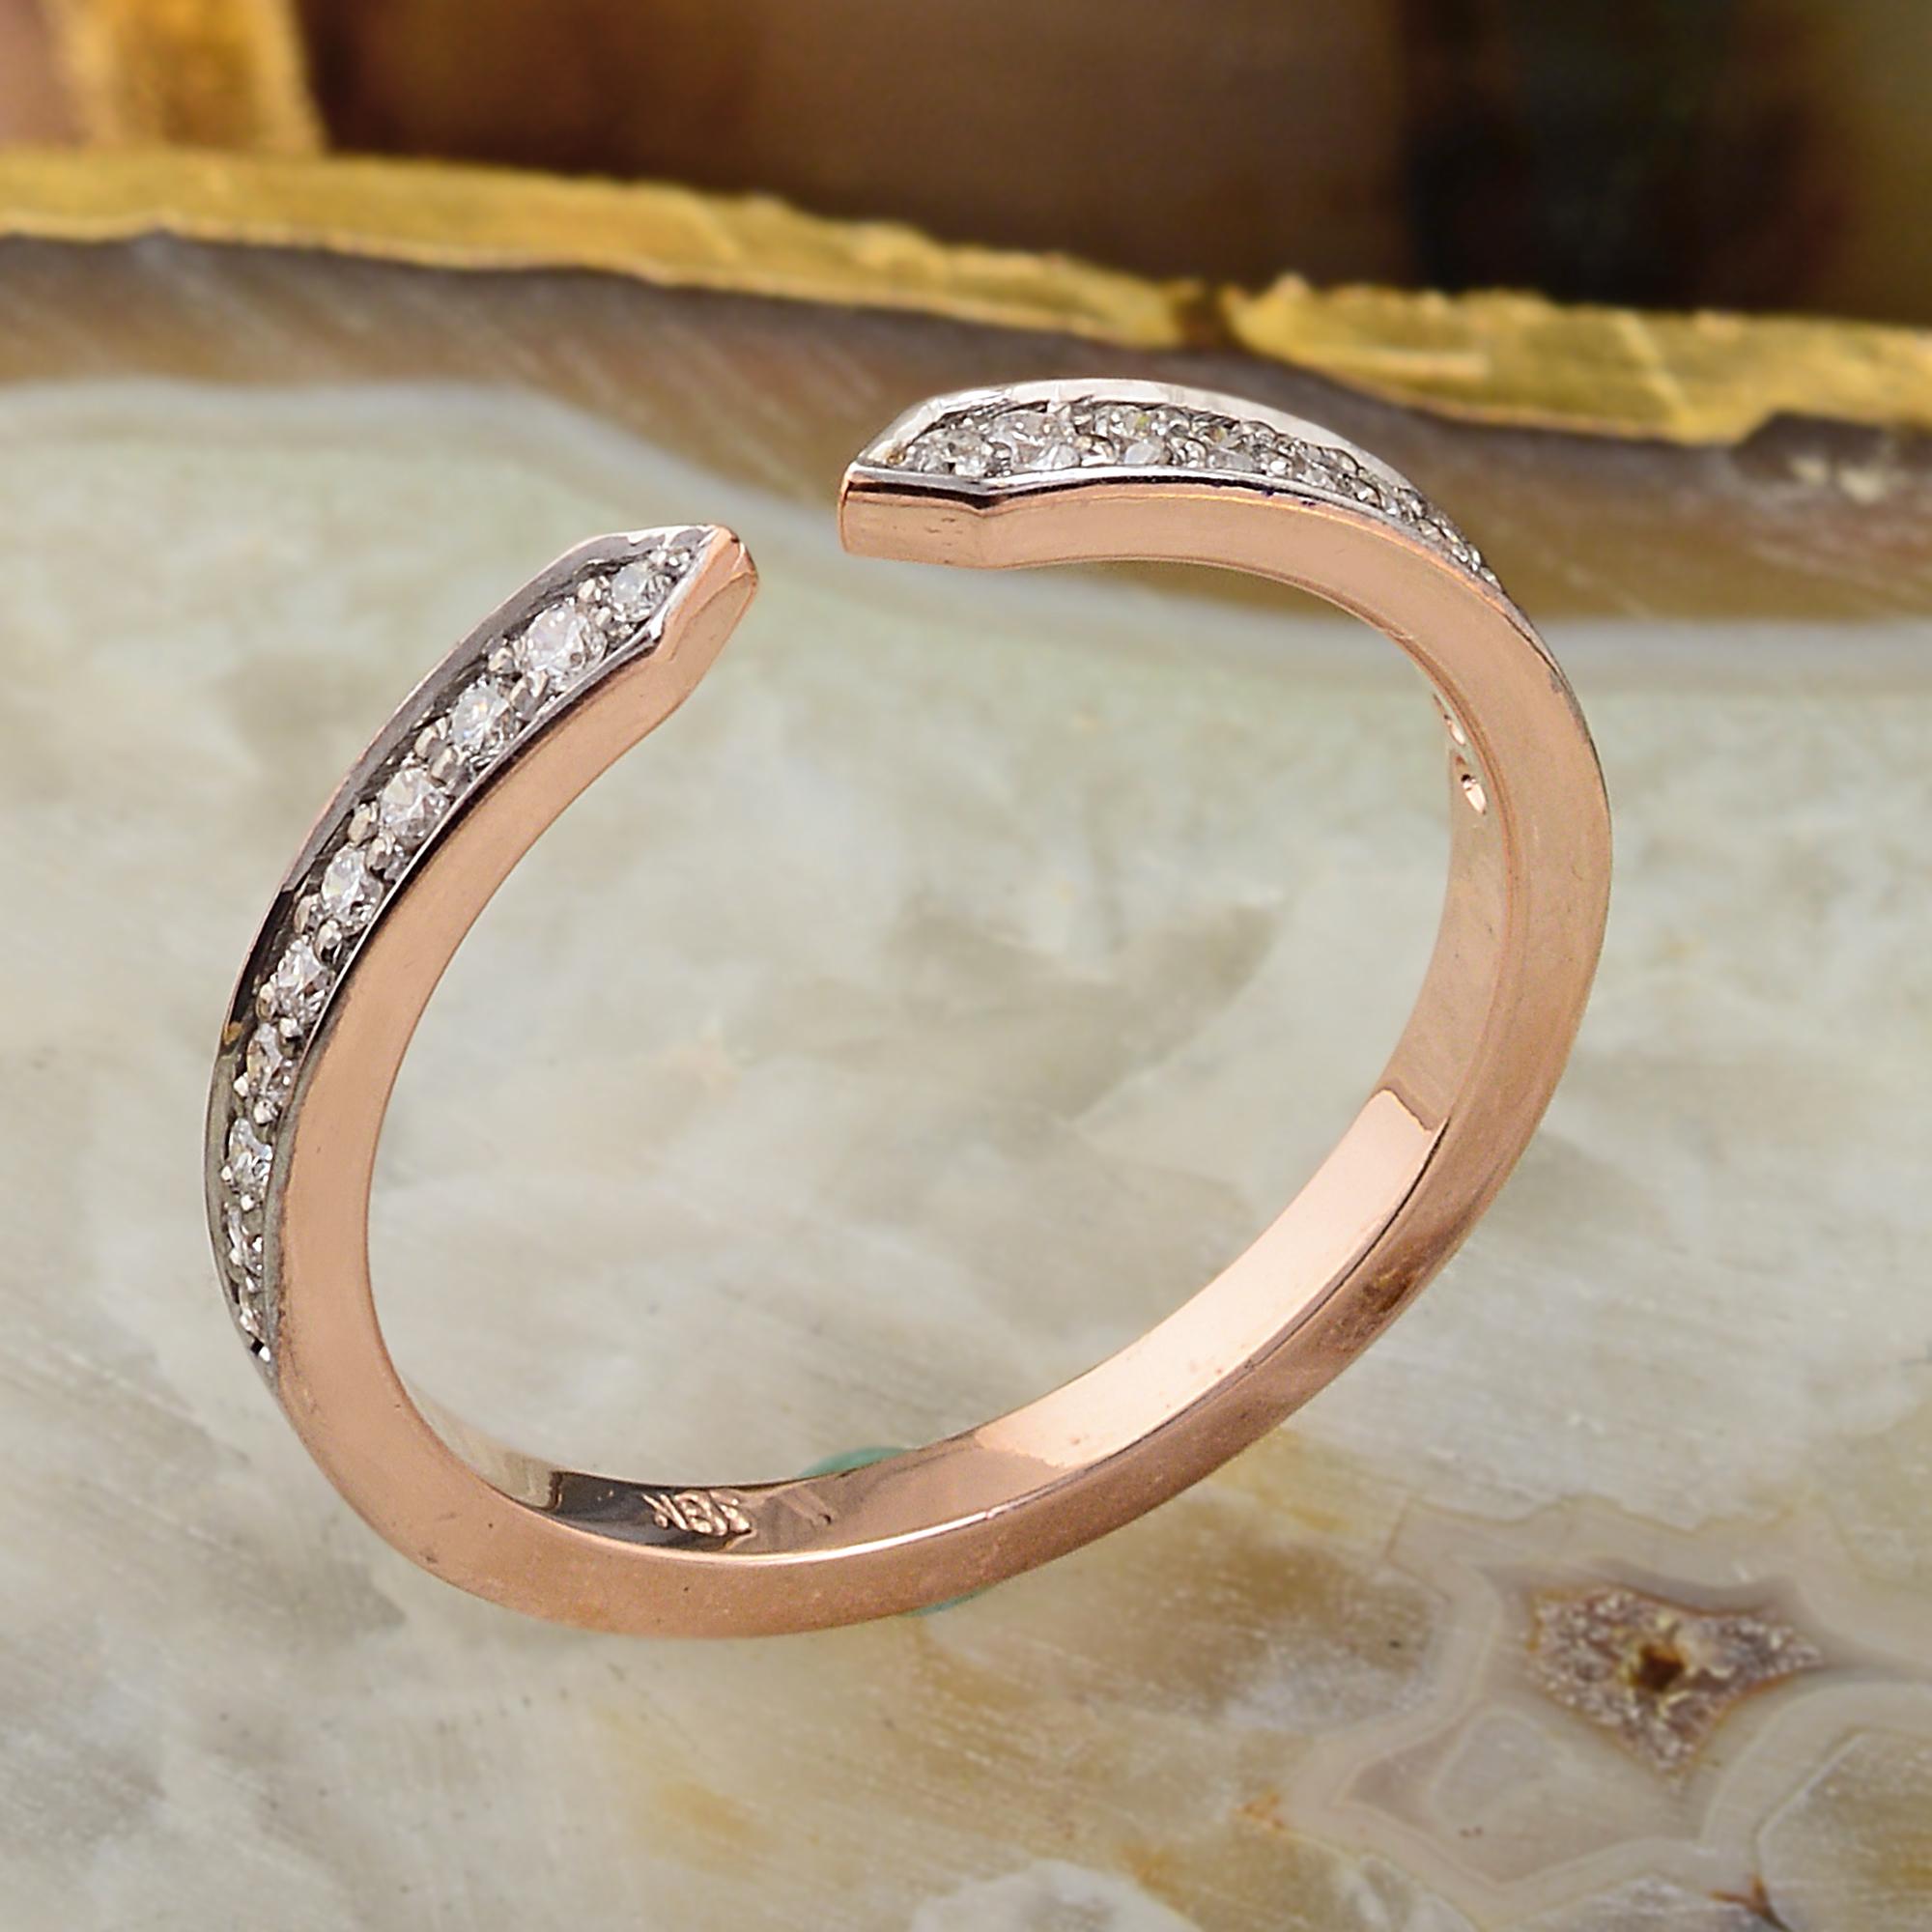 For Sale:  0.17 Carat SI Clarity HI Color Diamond Cuff Band Ring 18 Karat Rose Gold Jewelry 3